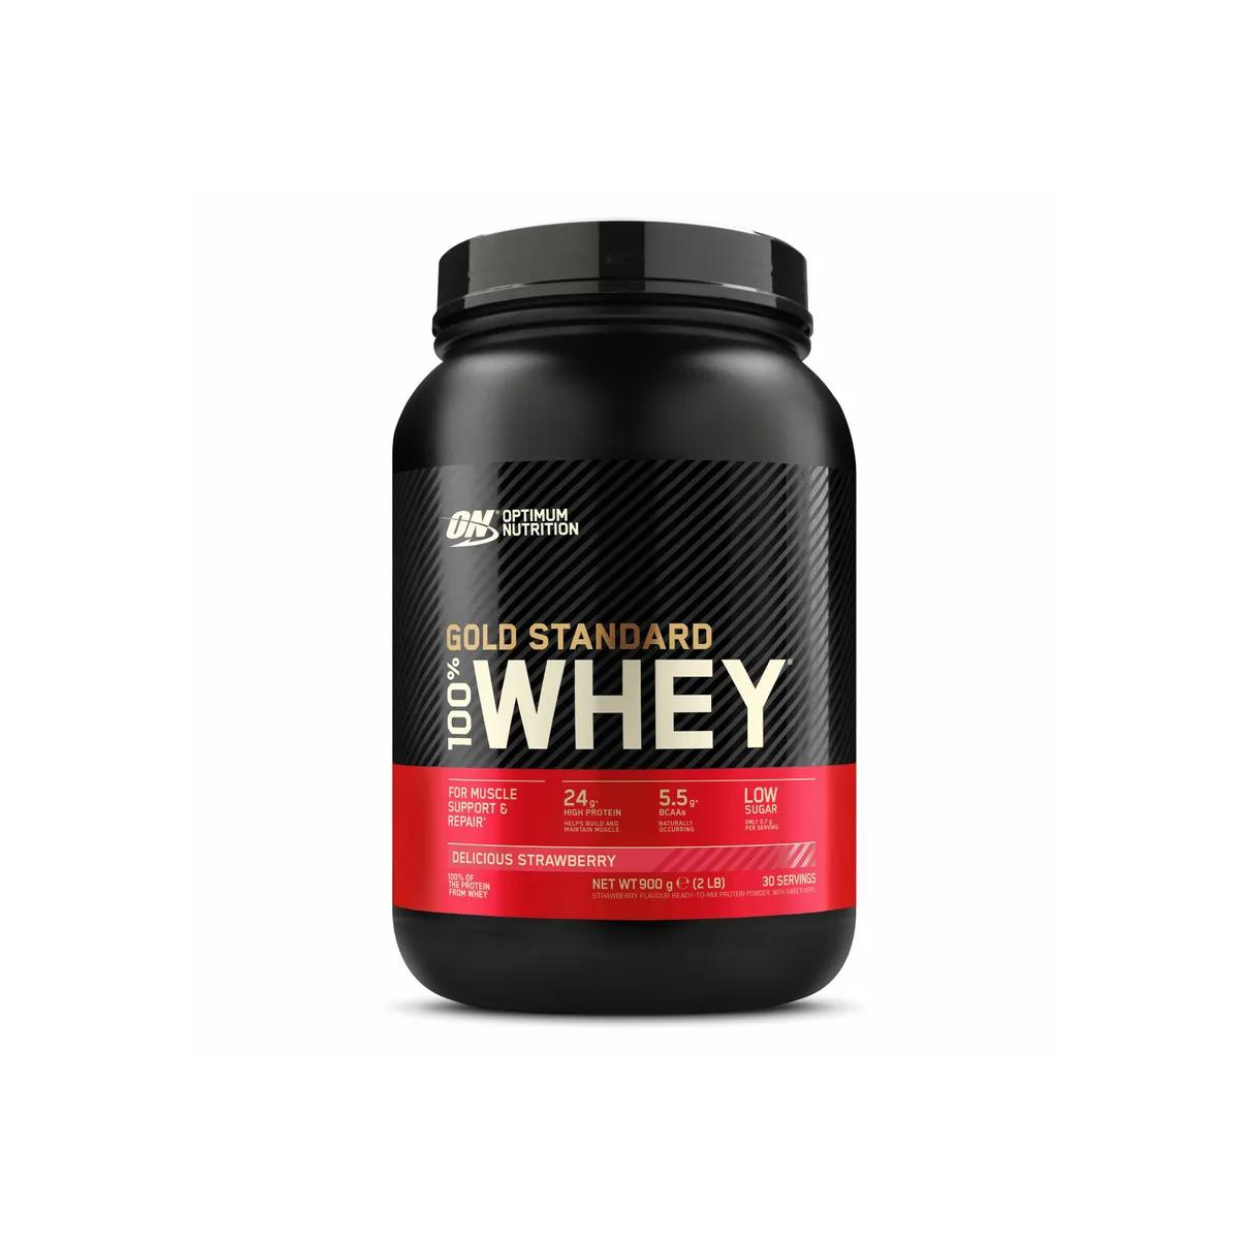 Optimum Nutrition Gold Standard Whey Delicious Strawberry